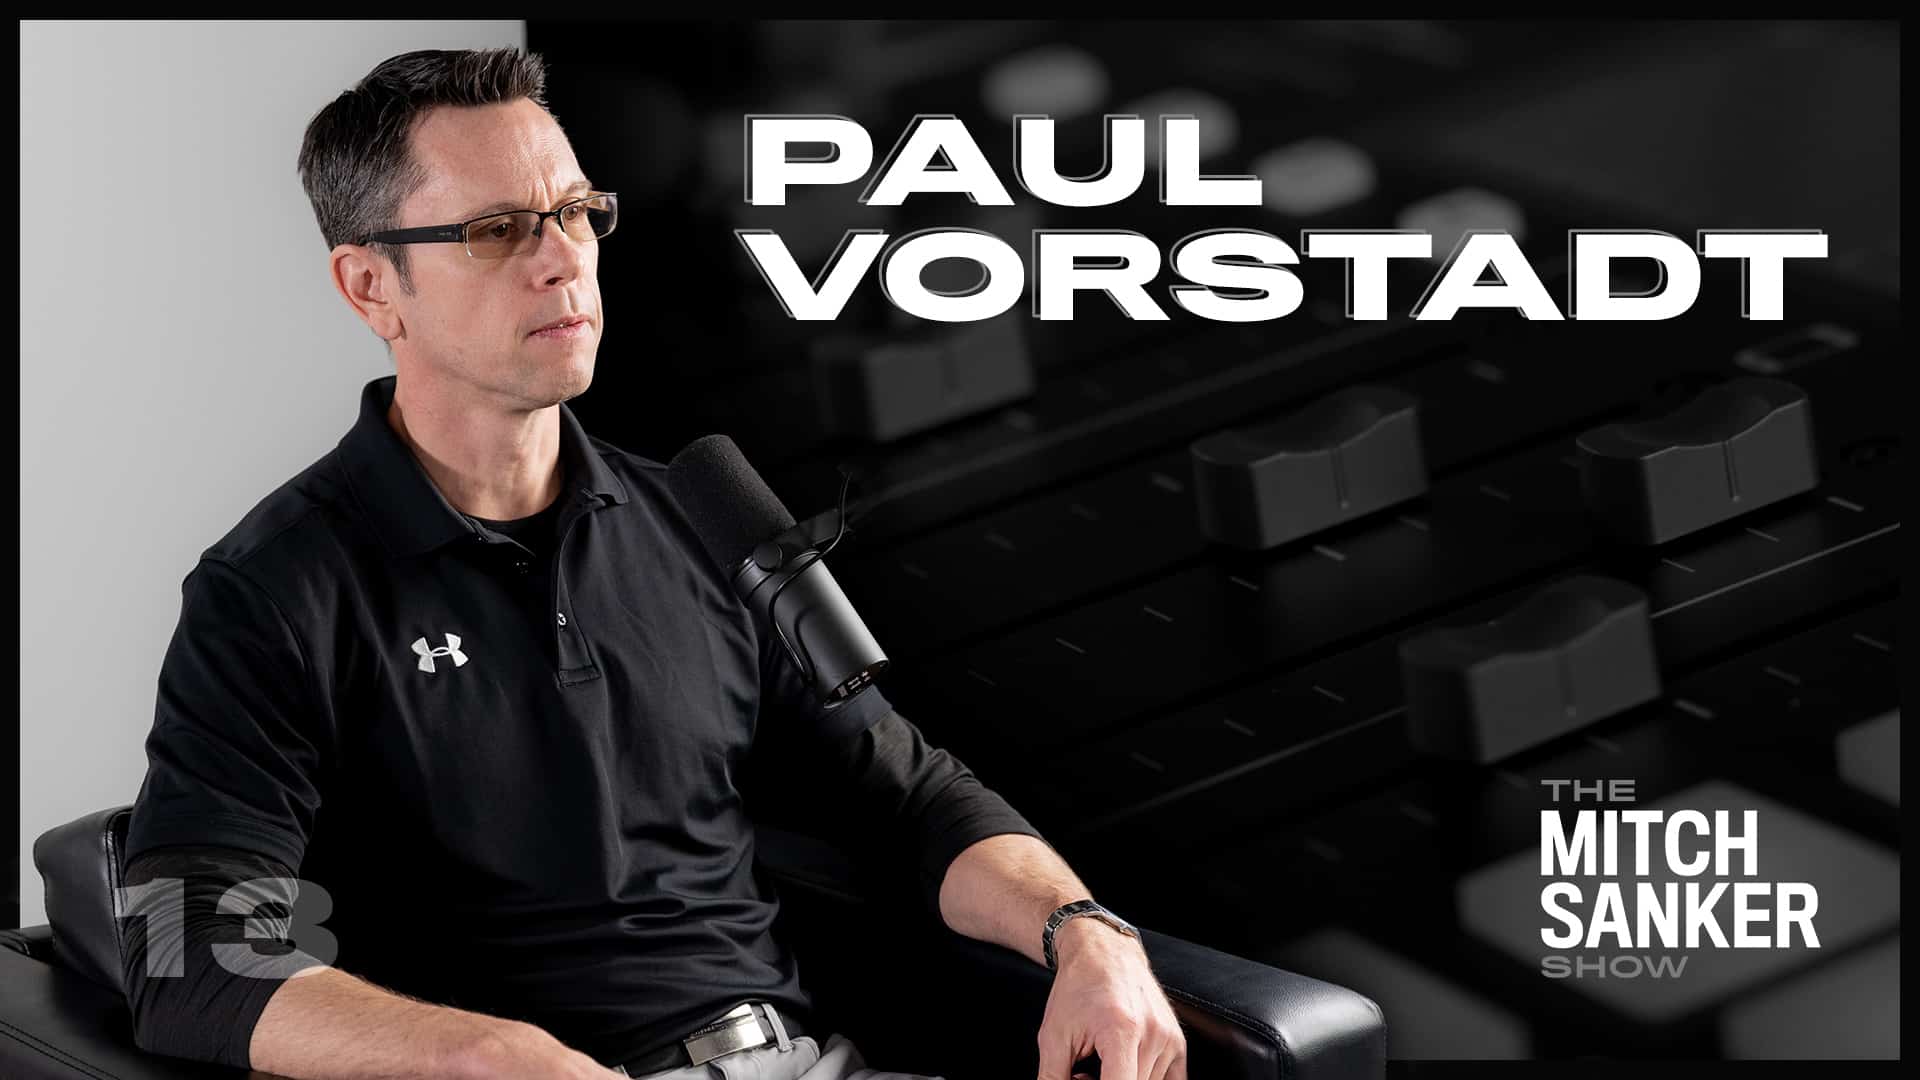 You are currently viewing The Mitch Sanker Show – Episode 13 featuring Paul Vorstadt